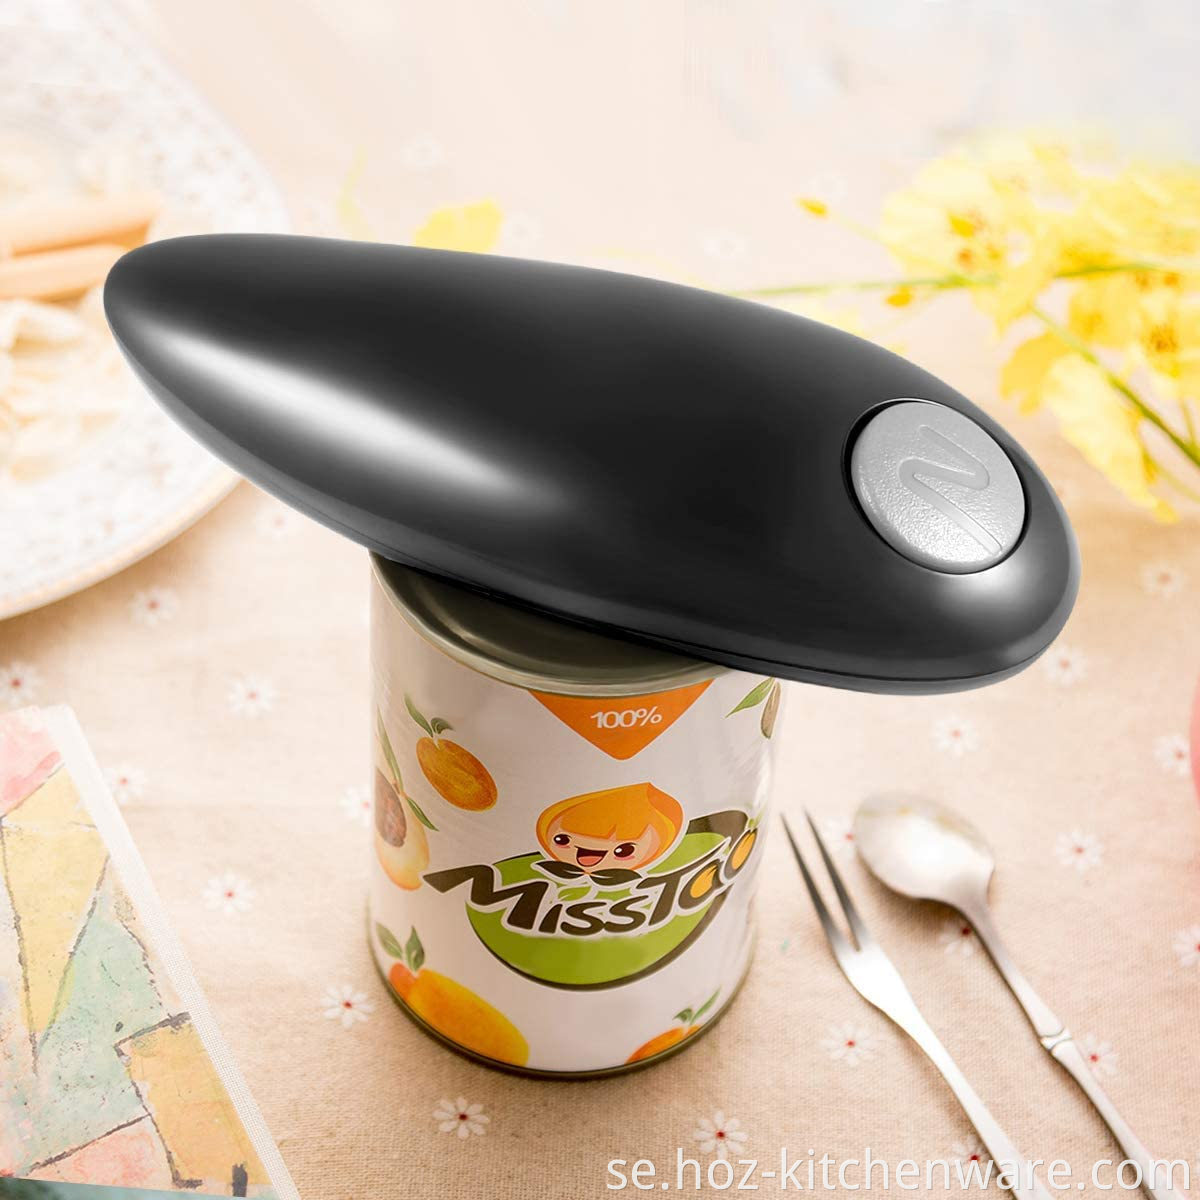 Electric Can Opener, Restaurant Can Opener Automatic, Smooth Edge Automatic Electric Can Opener